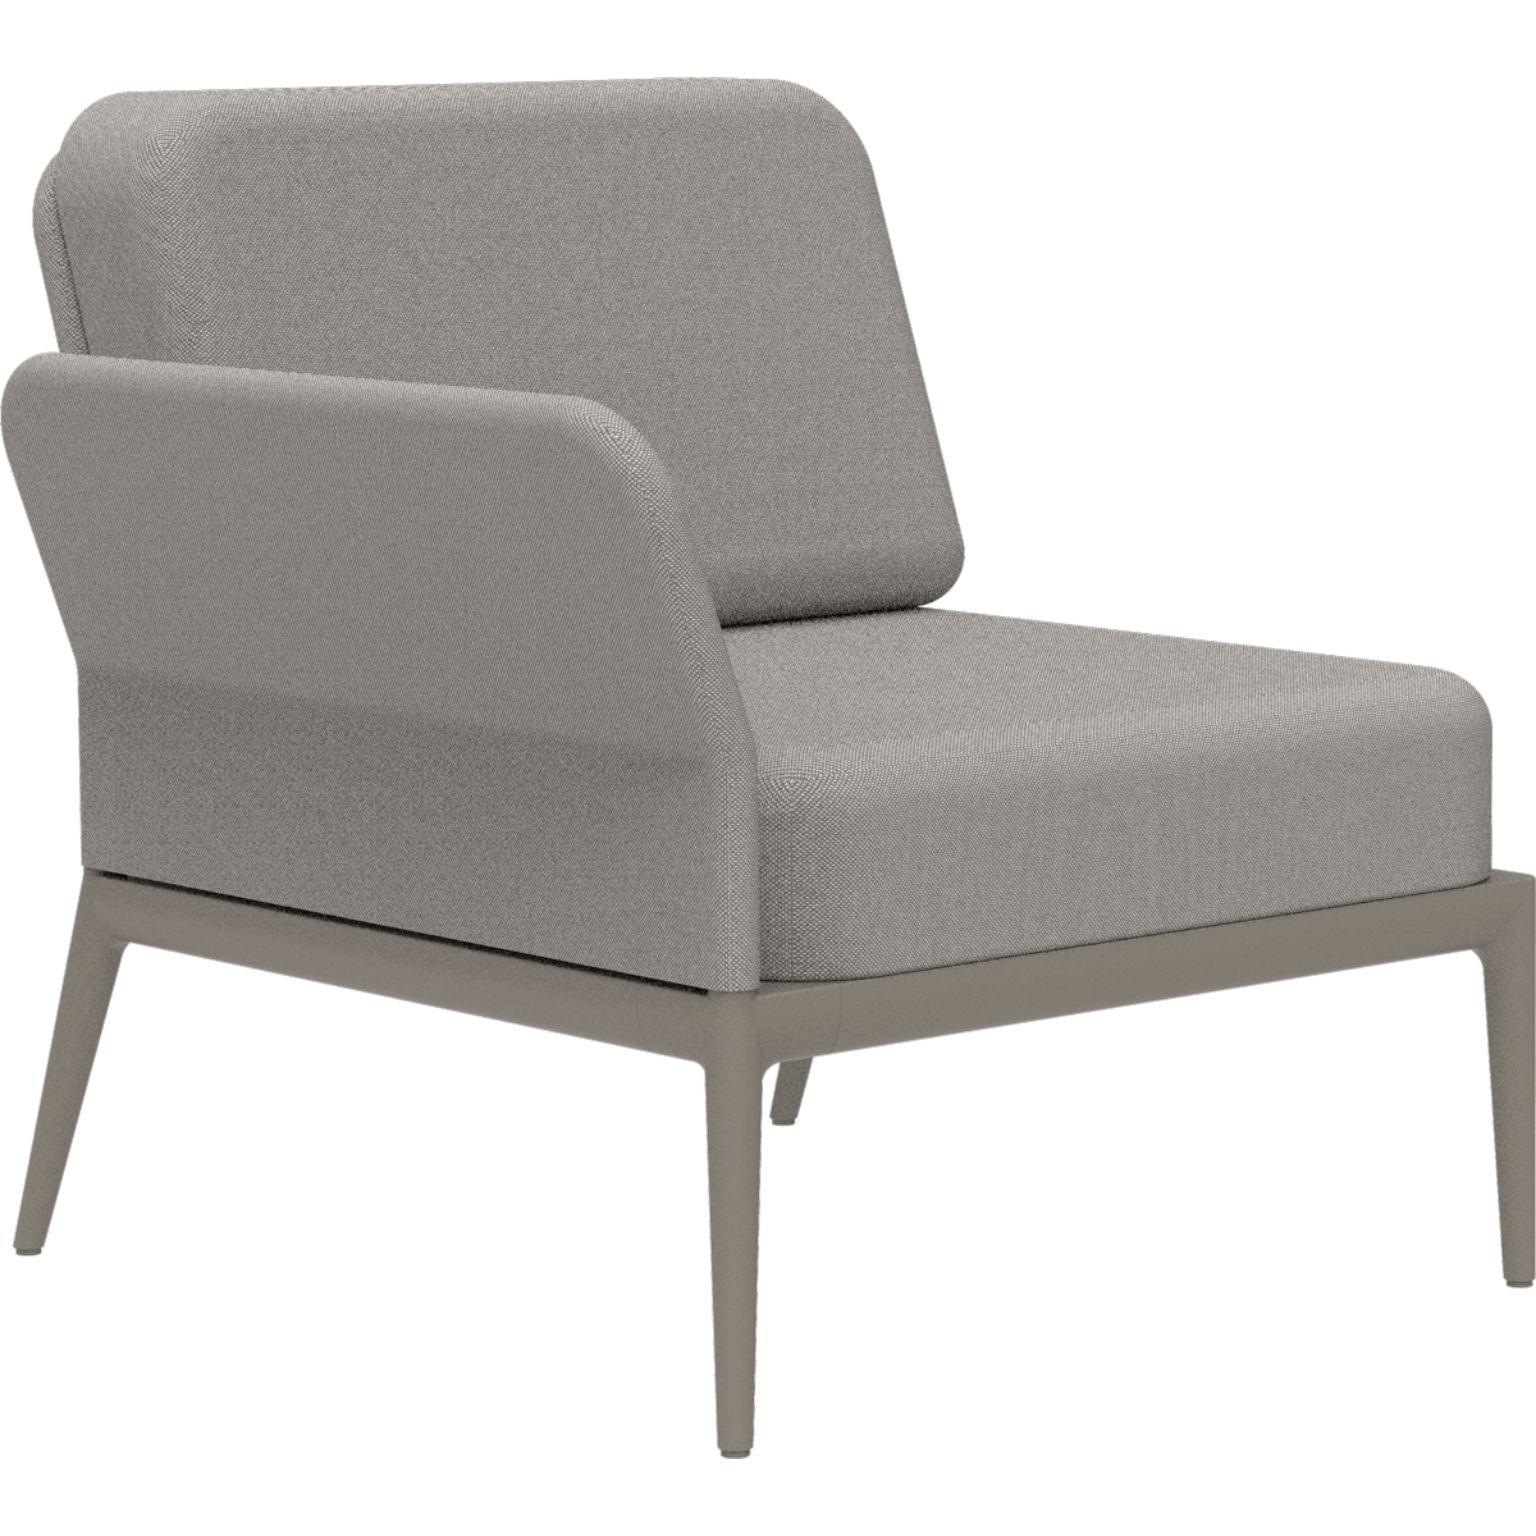 Cover Cream Right Modular Sofa by MOWEE
Dimensions: D83 x W80 x H81 cm (seat height 42 cm).
Material: Aluminum and upholstery. 
Weight: 19 kg.
Also available in different colors and finishes. Please contact us.

An unmistakable collection for